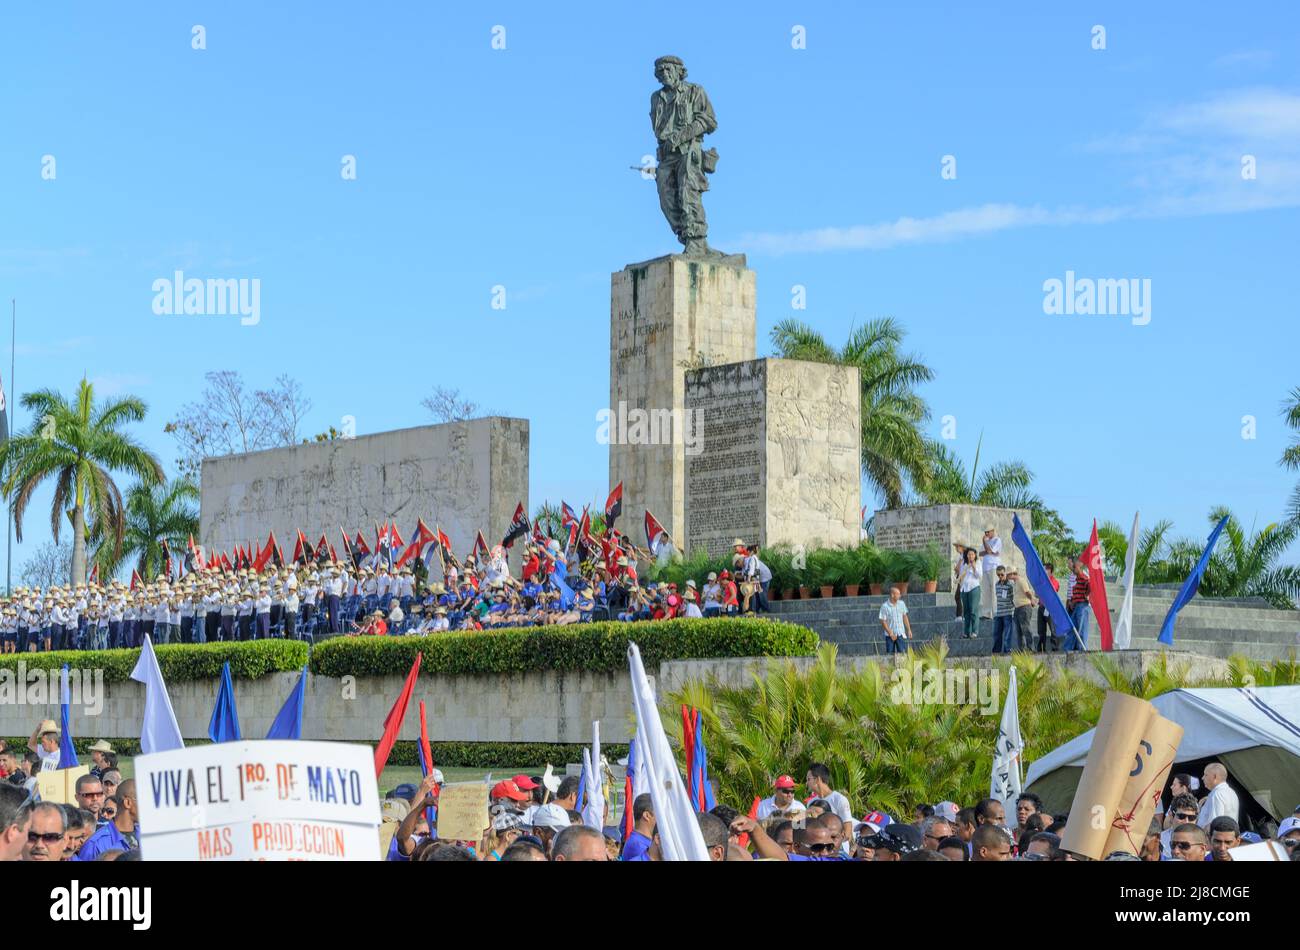 Crowd of people marching by the main tribune. The traditional May Day or Workers Day celebrations are held annually in the Che Guevara Revolution Squa Stock Photo